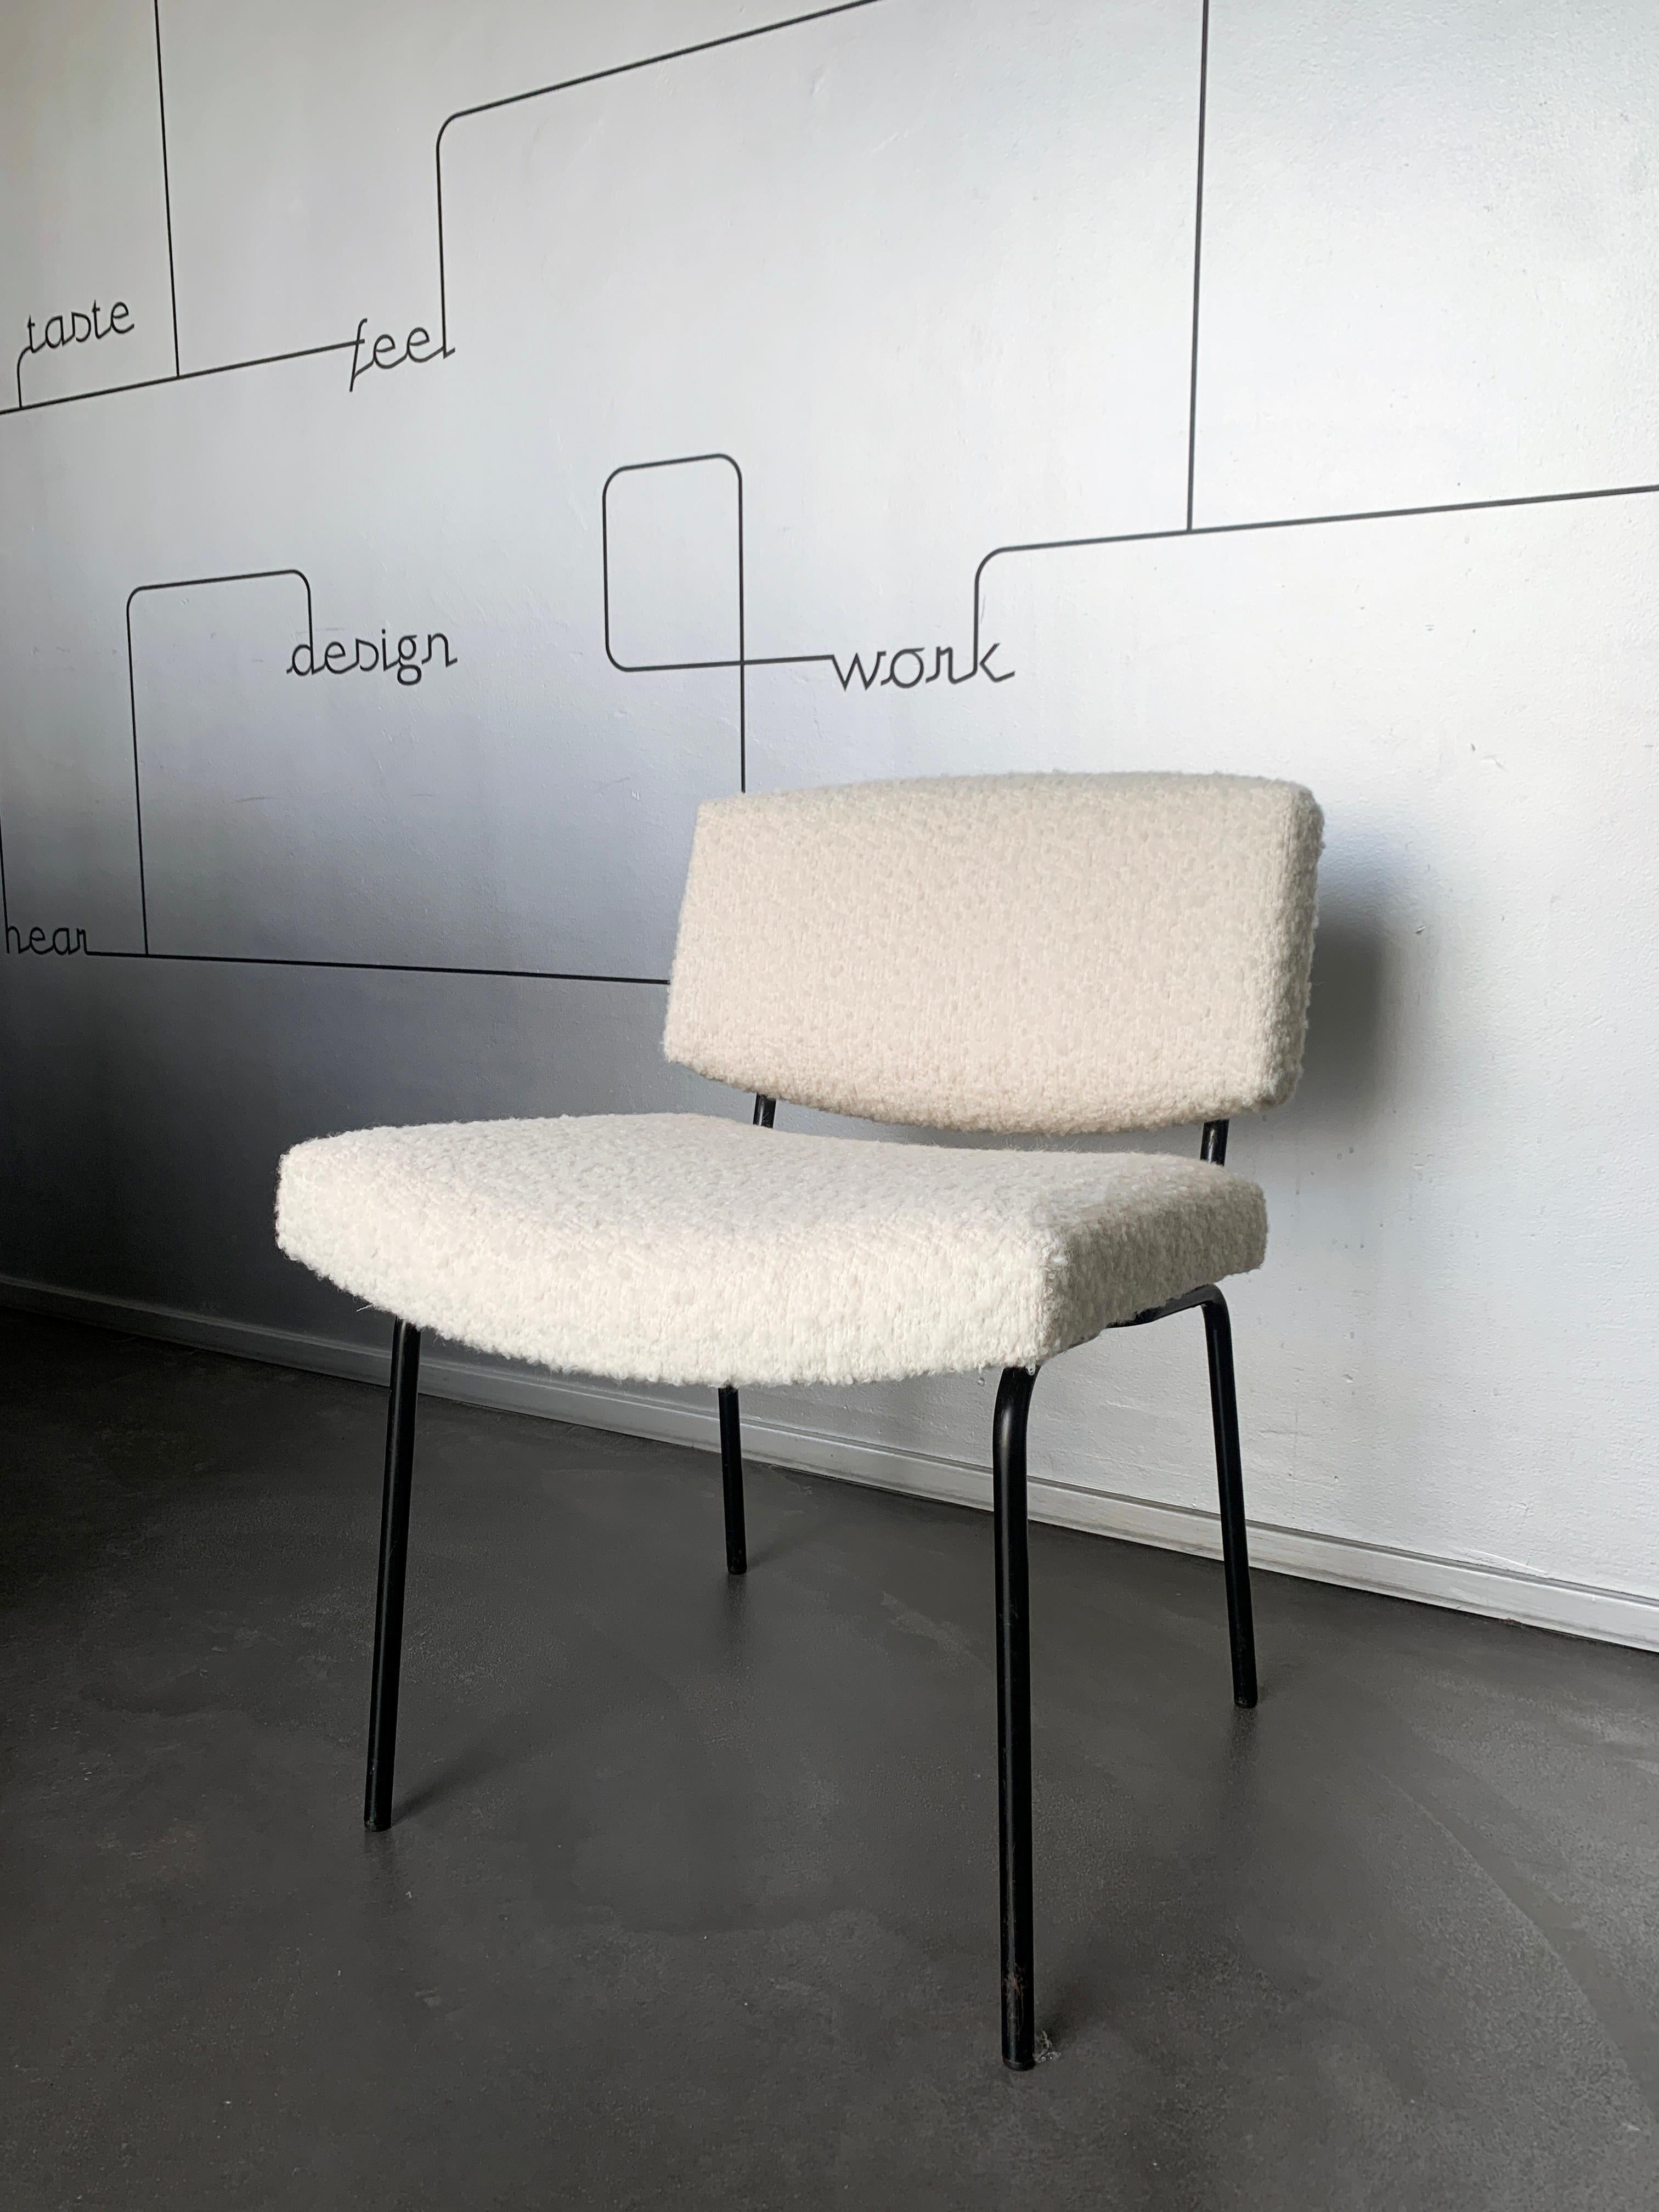 Pierre Guariche designed the conseil chair for the Belgian furniture manufacturer Meurop in the 1960s. 

The chair has been newly upholstered in a warm white bouclette fabric.

Between 1960 to 1968 Pierre Guariche was Art Director of the Belgian